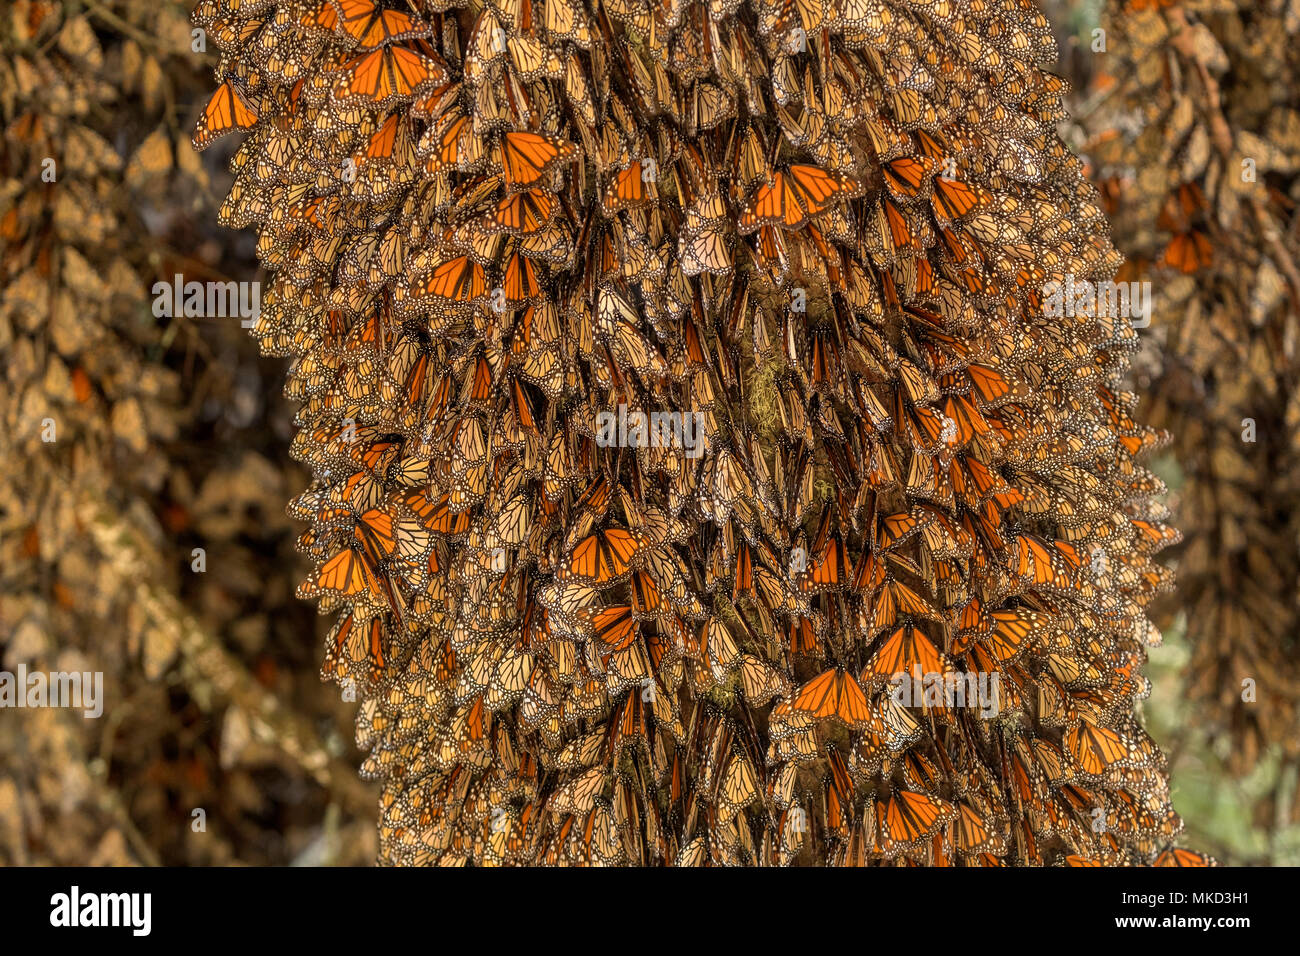 Monarch butterfly (Danaus plexippus), In wintering from November to March in oyamel pine forests (Abies religiosa), El Rosario, Reserve of the Biosfera Monarca, Angangueo, State of Michoacan, Mexico Stock Photo